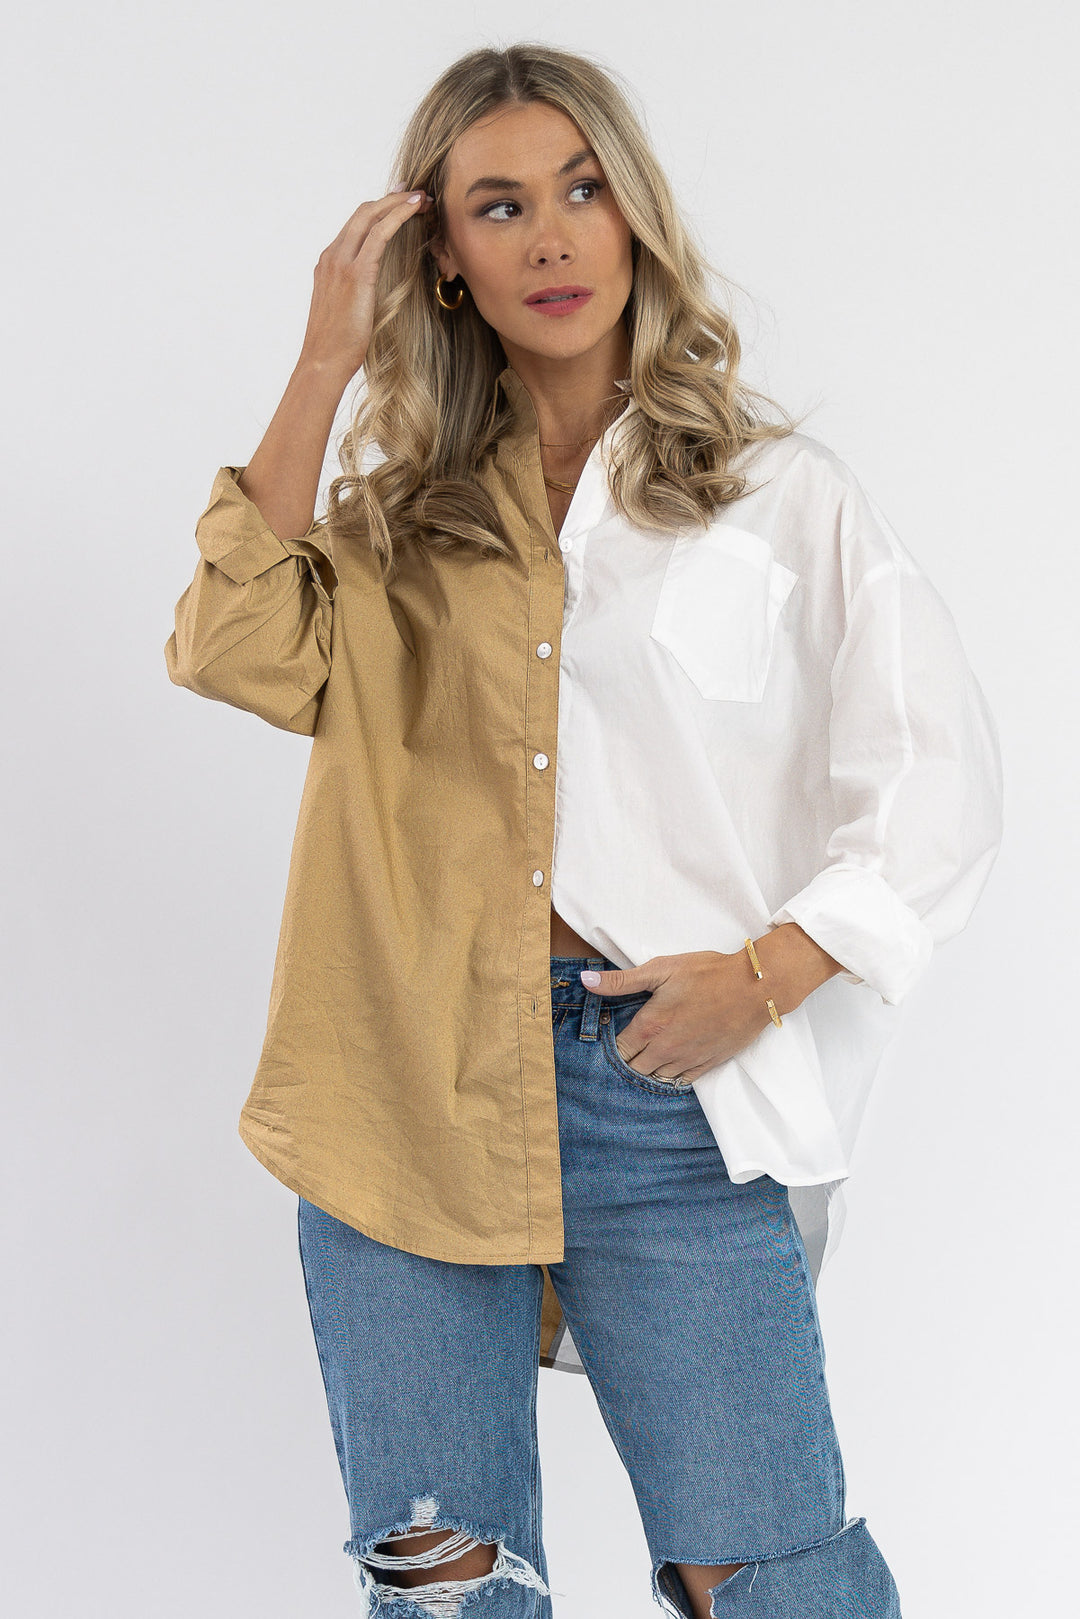 Sidney Button Up Top - Final Sale